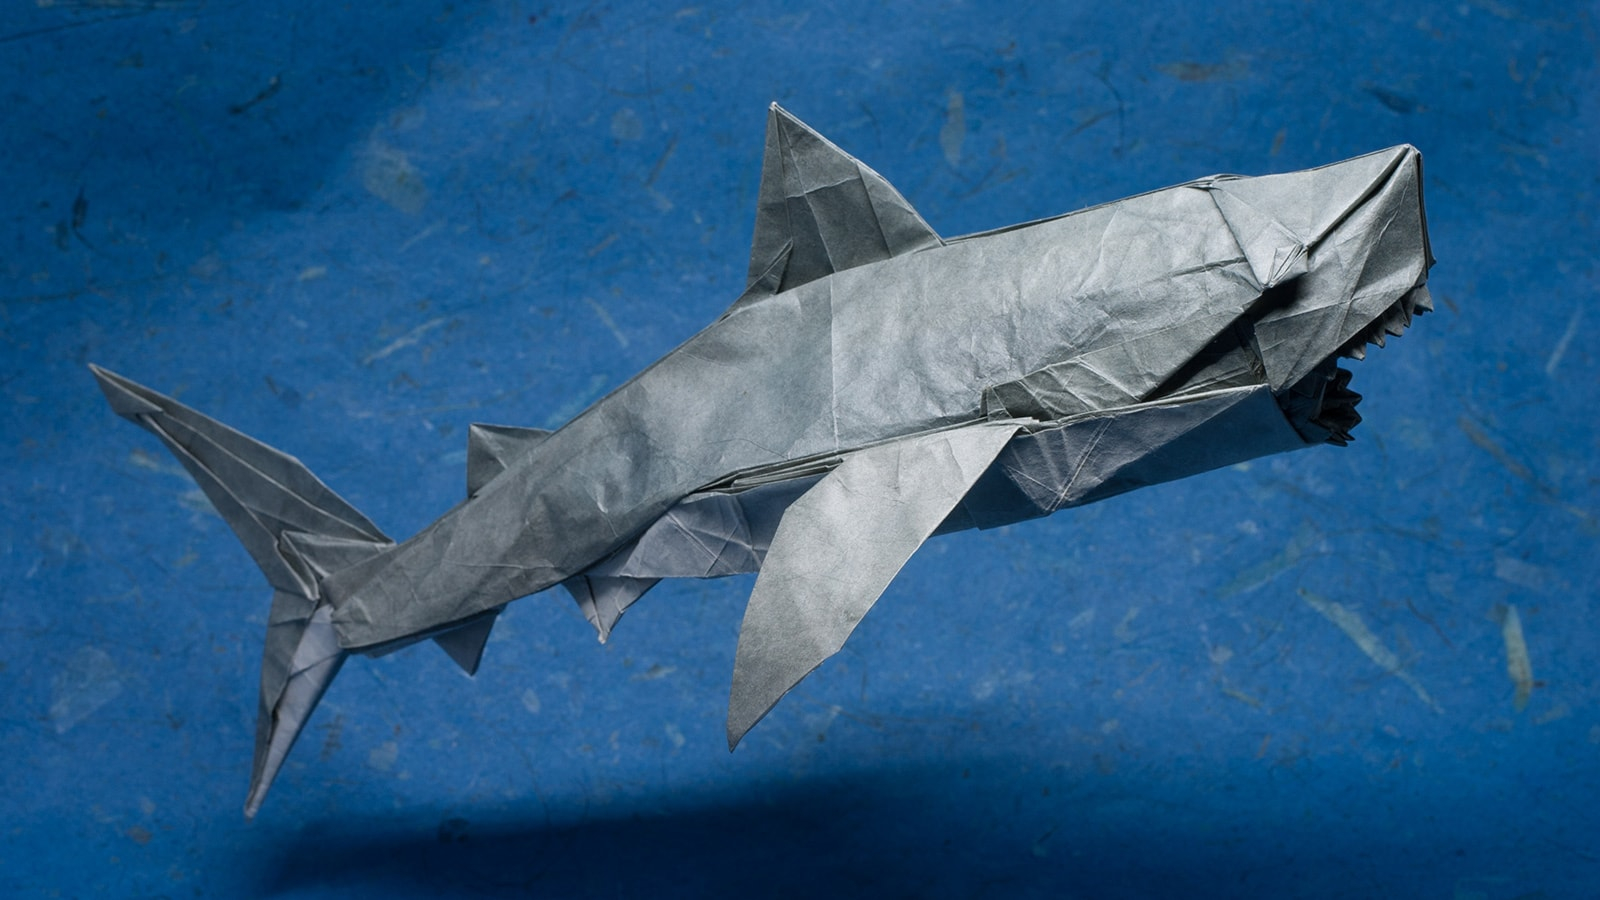 How To Make An Origami Shark Magnificent Origami Sharks To Celebrate Shark Awareness Day